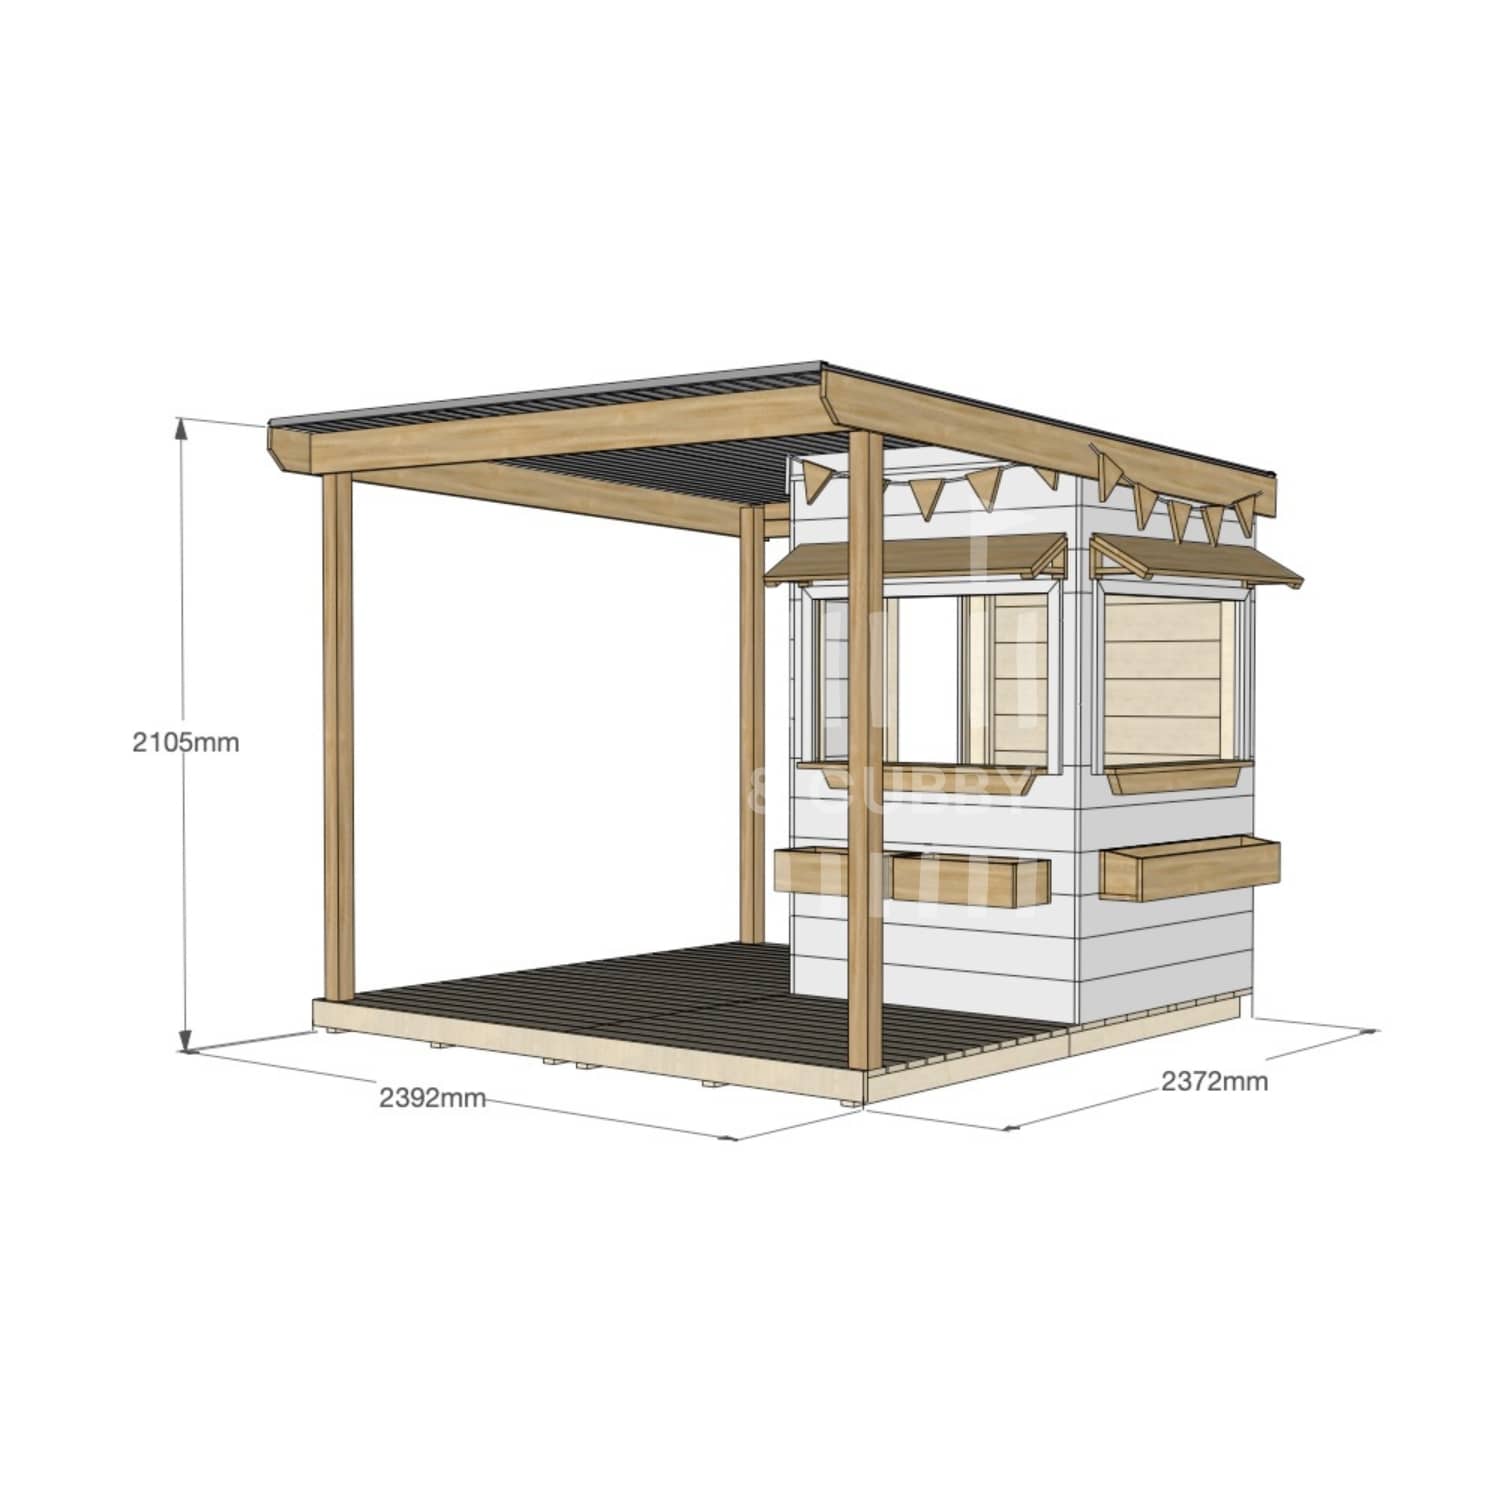 Commercial grade extended height painted little square pine timber cubby house with wraparound verandah, accessories and dimensions